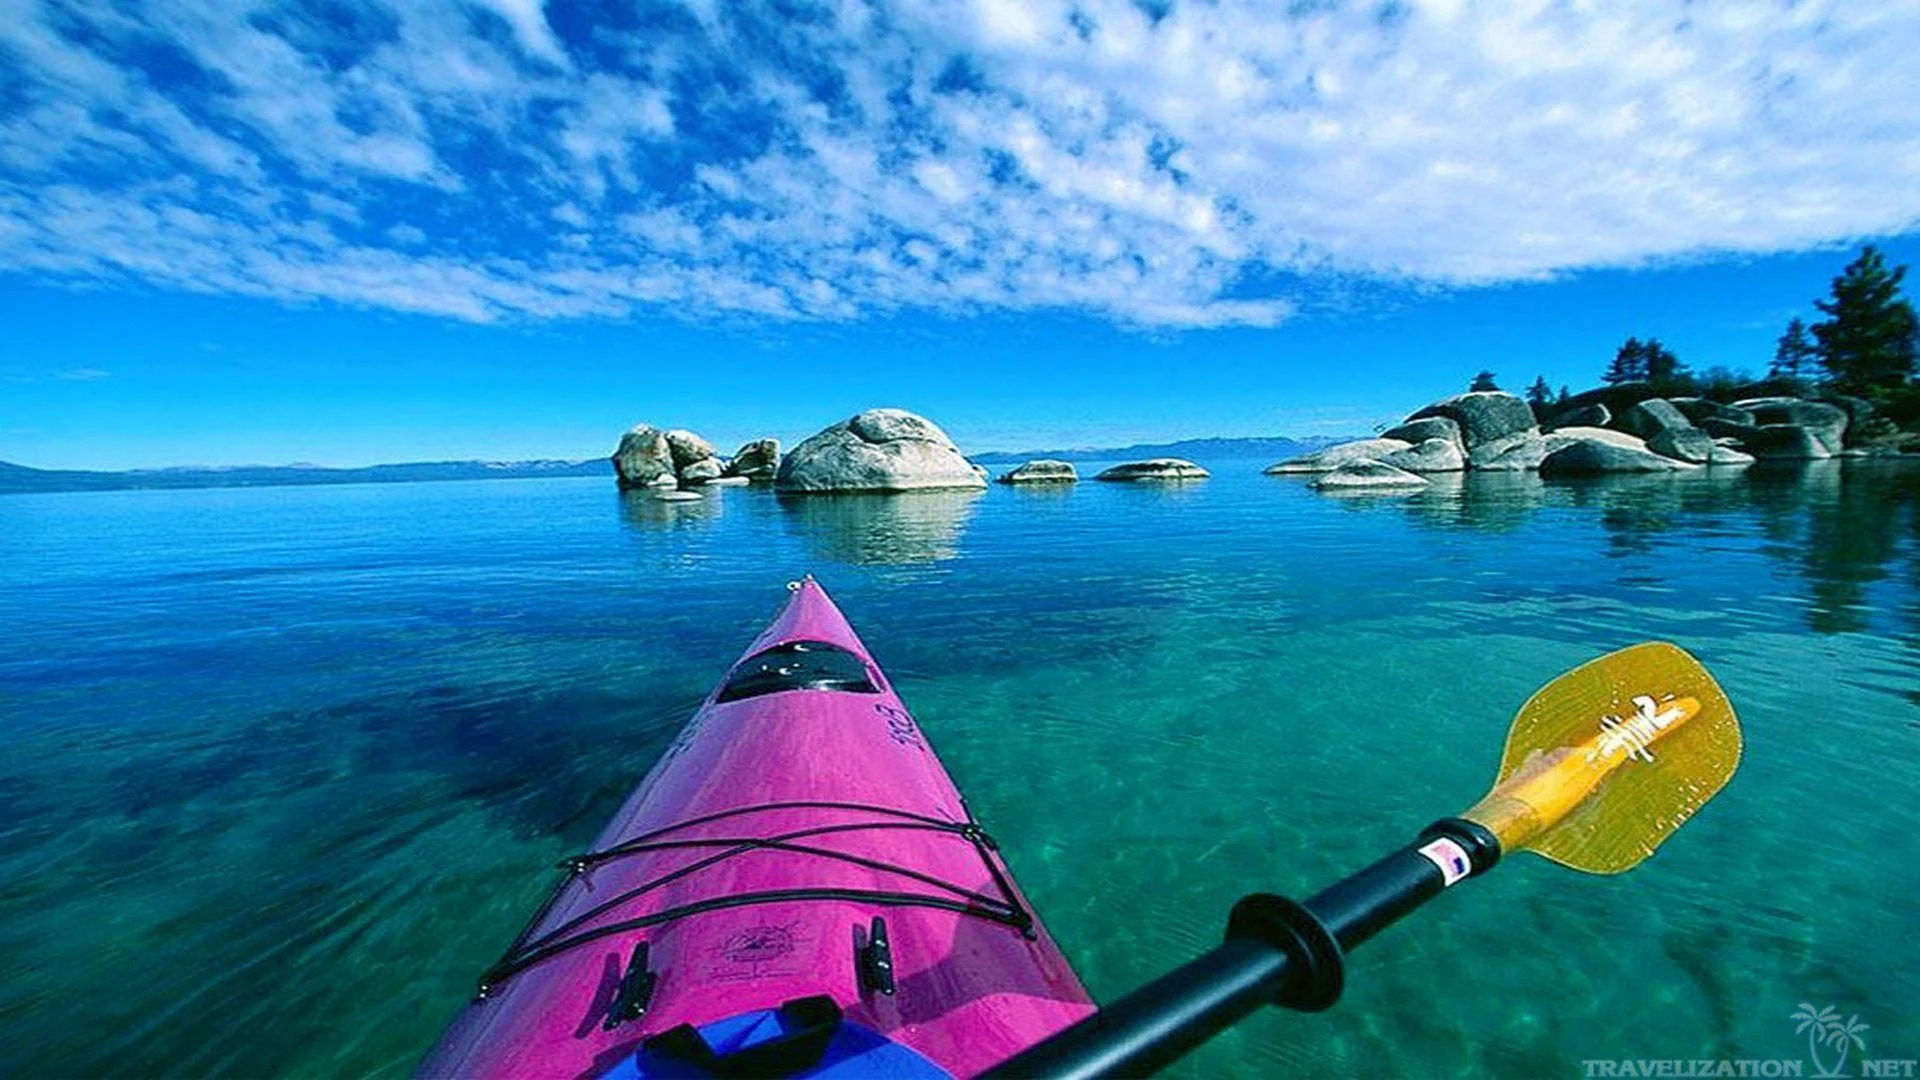 Kayaking: A kayak with a double-bladed paddle, Natural landscape and water trips activity. 1920x1080 Full HD Background.